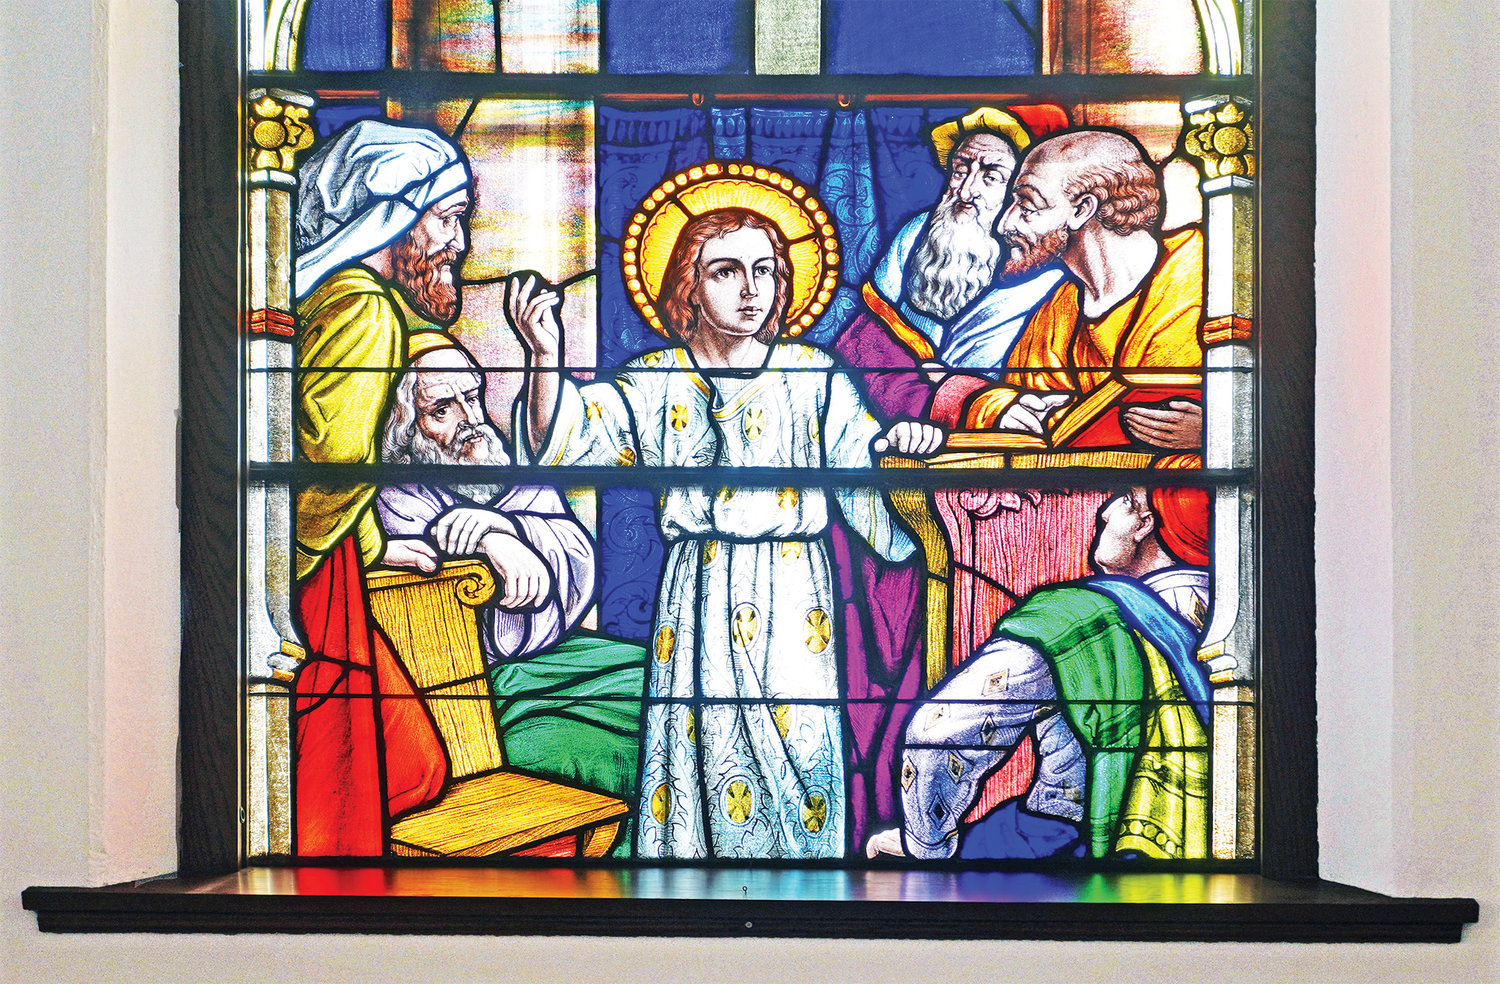 The teachers in the Temple listen to the child Jesus, in this stained glass depiction in St. Thomas the Apostle Church in St. Thomas. “All who heard Him were astounded at His understanding and His answers” (Luke 2:47). Pope Francis is confident that the Holy Spirit will inspire people of all stations in life to help discern God’s will for the Church through the preparations for the Synod of Bishops.